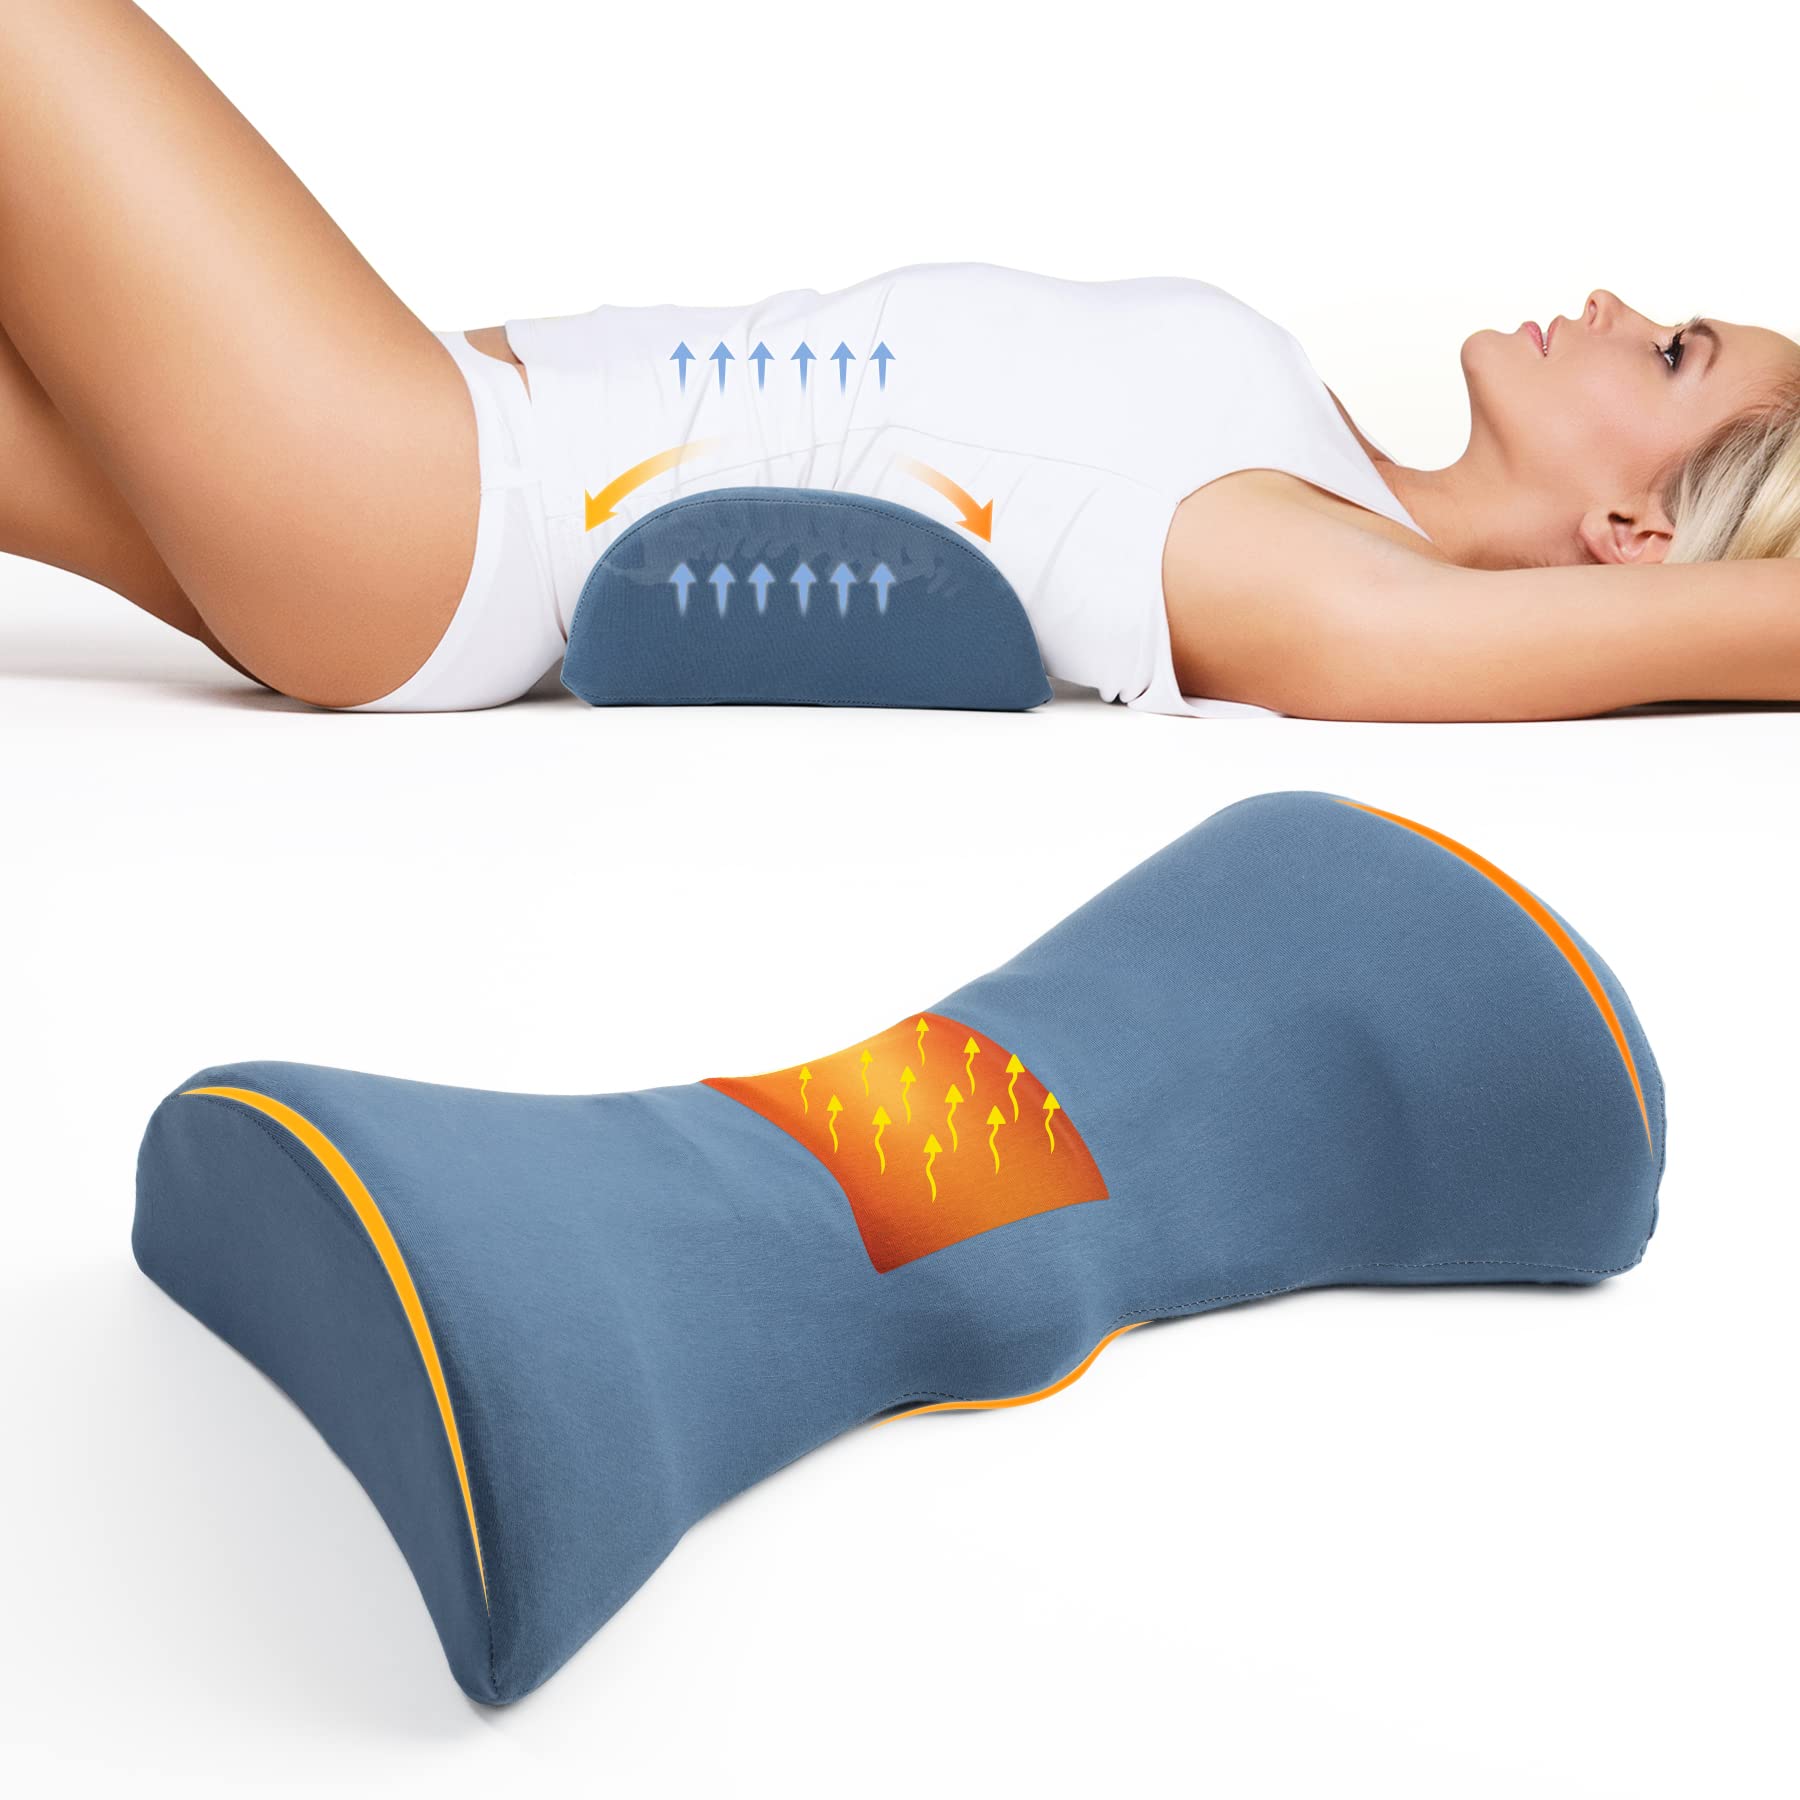 Lumbar Support Pillow for Sleeping, Heated Lumbar Pillow for Lower Back Pain Relief with Graphene Heating and Magnetic, Memory Foam Lower Back Supp...